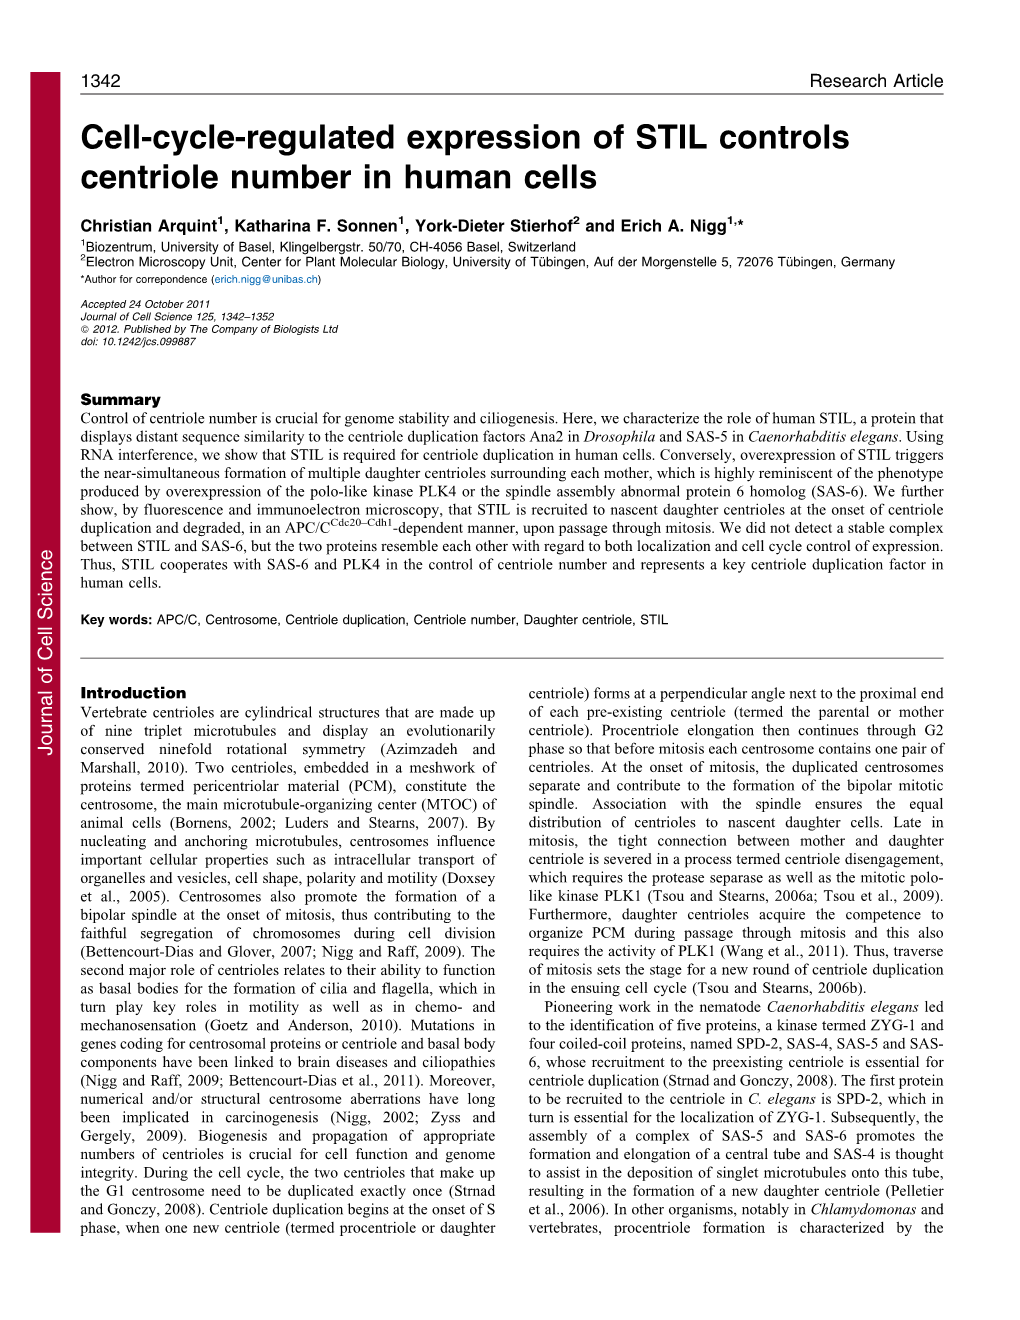 Cell-Cycle-Regulated Expression of STIL Controls Centriole Number in Human Cells